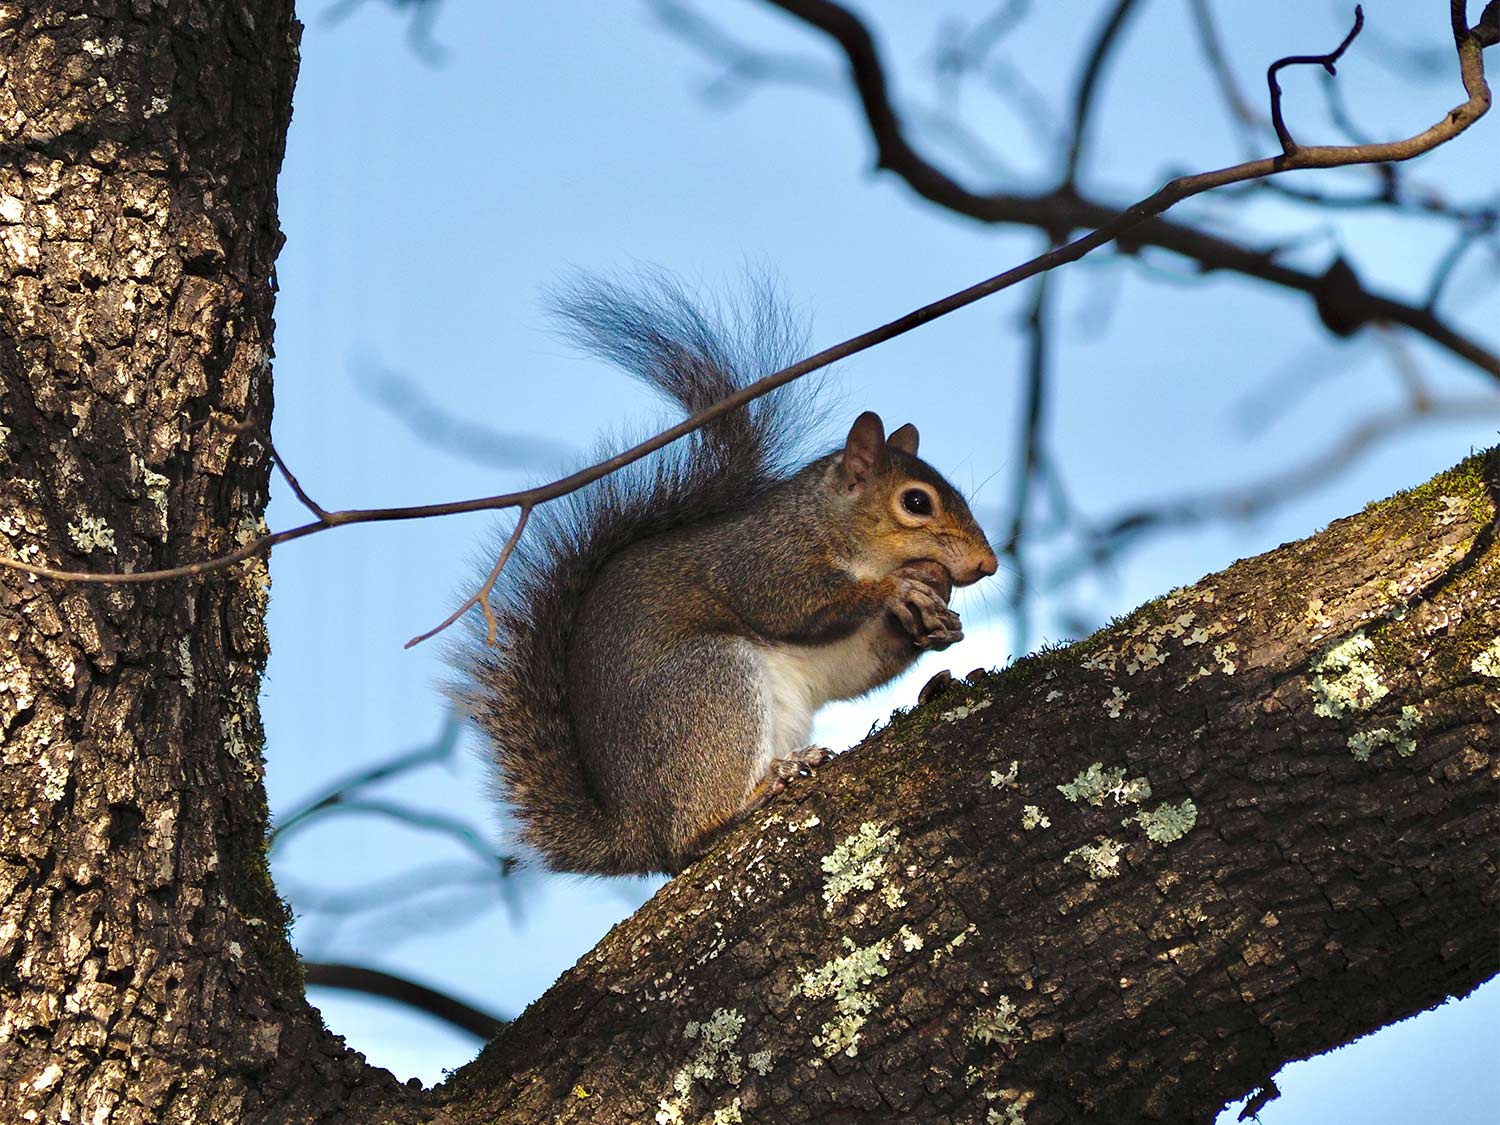 A small squirrel sits in a tree limb and nibbles on foods.